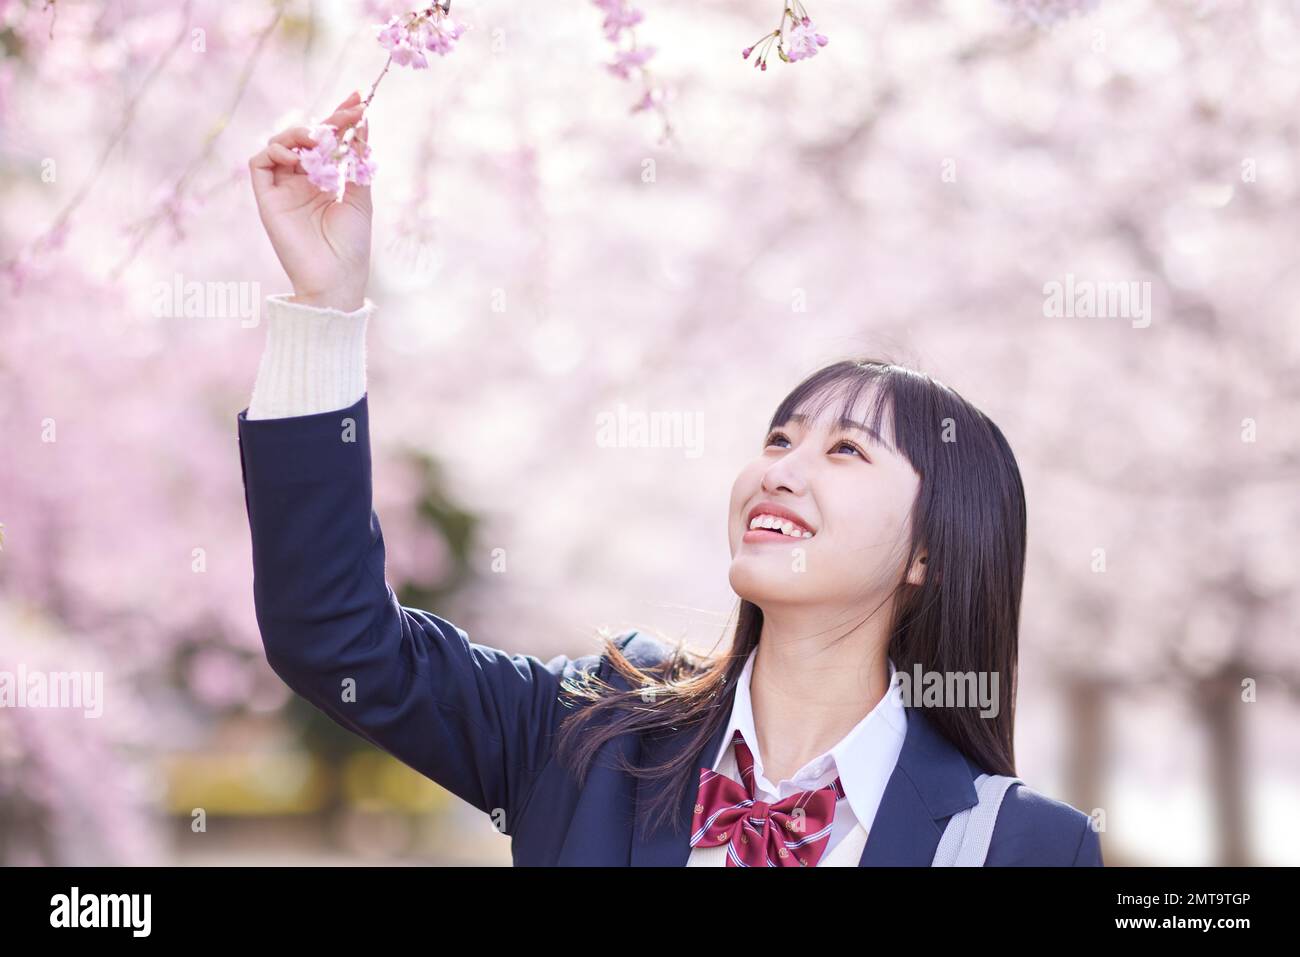 Japanese high school student portrait with cherry blossoms in full bloom Stock Photo